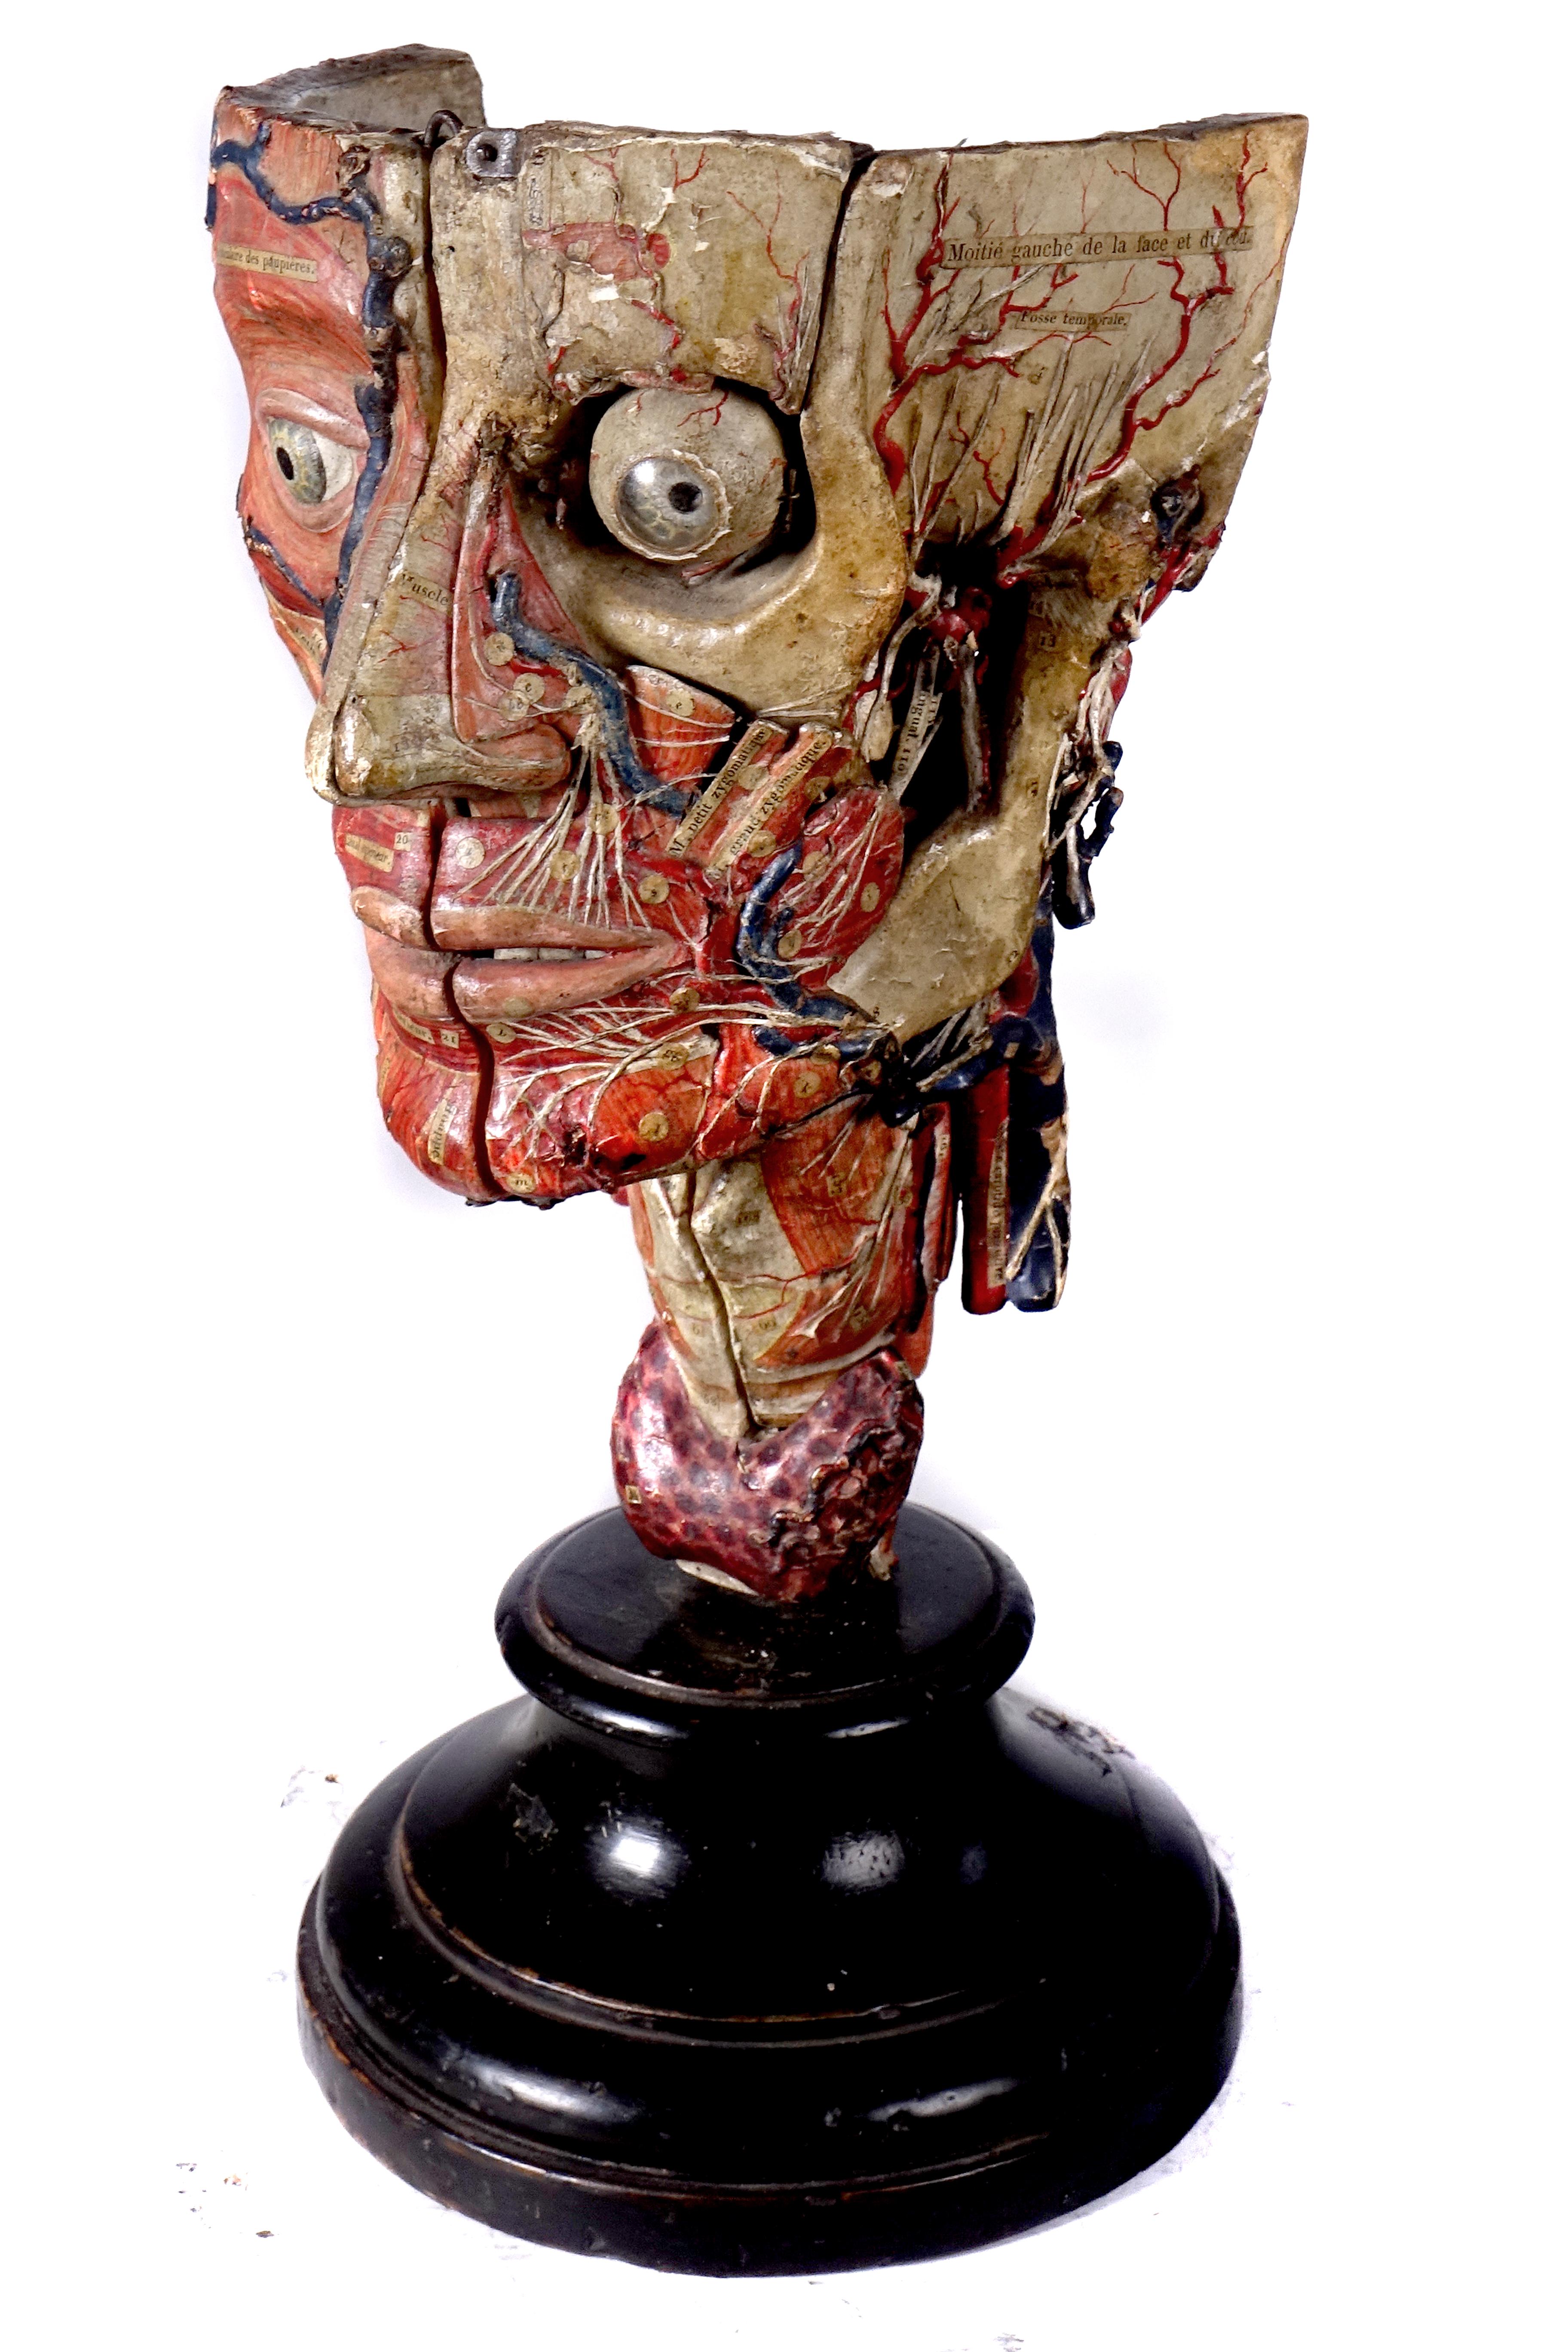 This fantastically detailed papier mâché model of the head dates to the mid-19th century. It was made by Dr. Auzoux and listed in his catalogue. The attention to detail is breathtaking. The structures are numbered and these pictures only scratch the